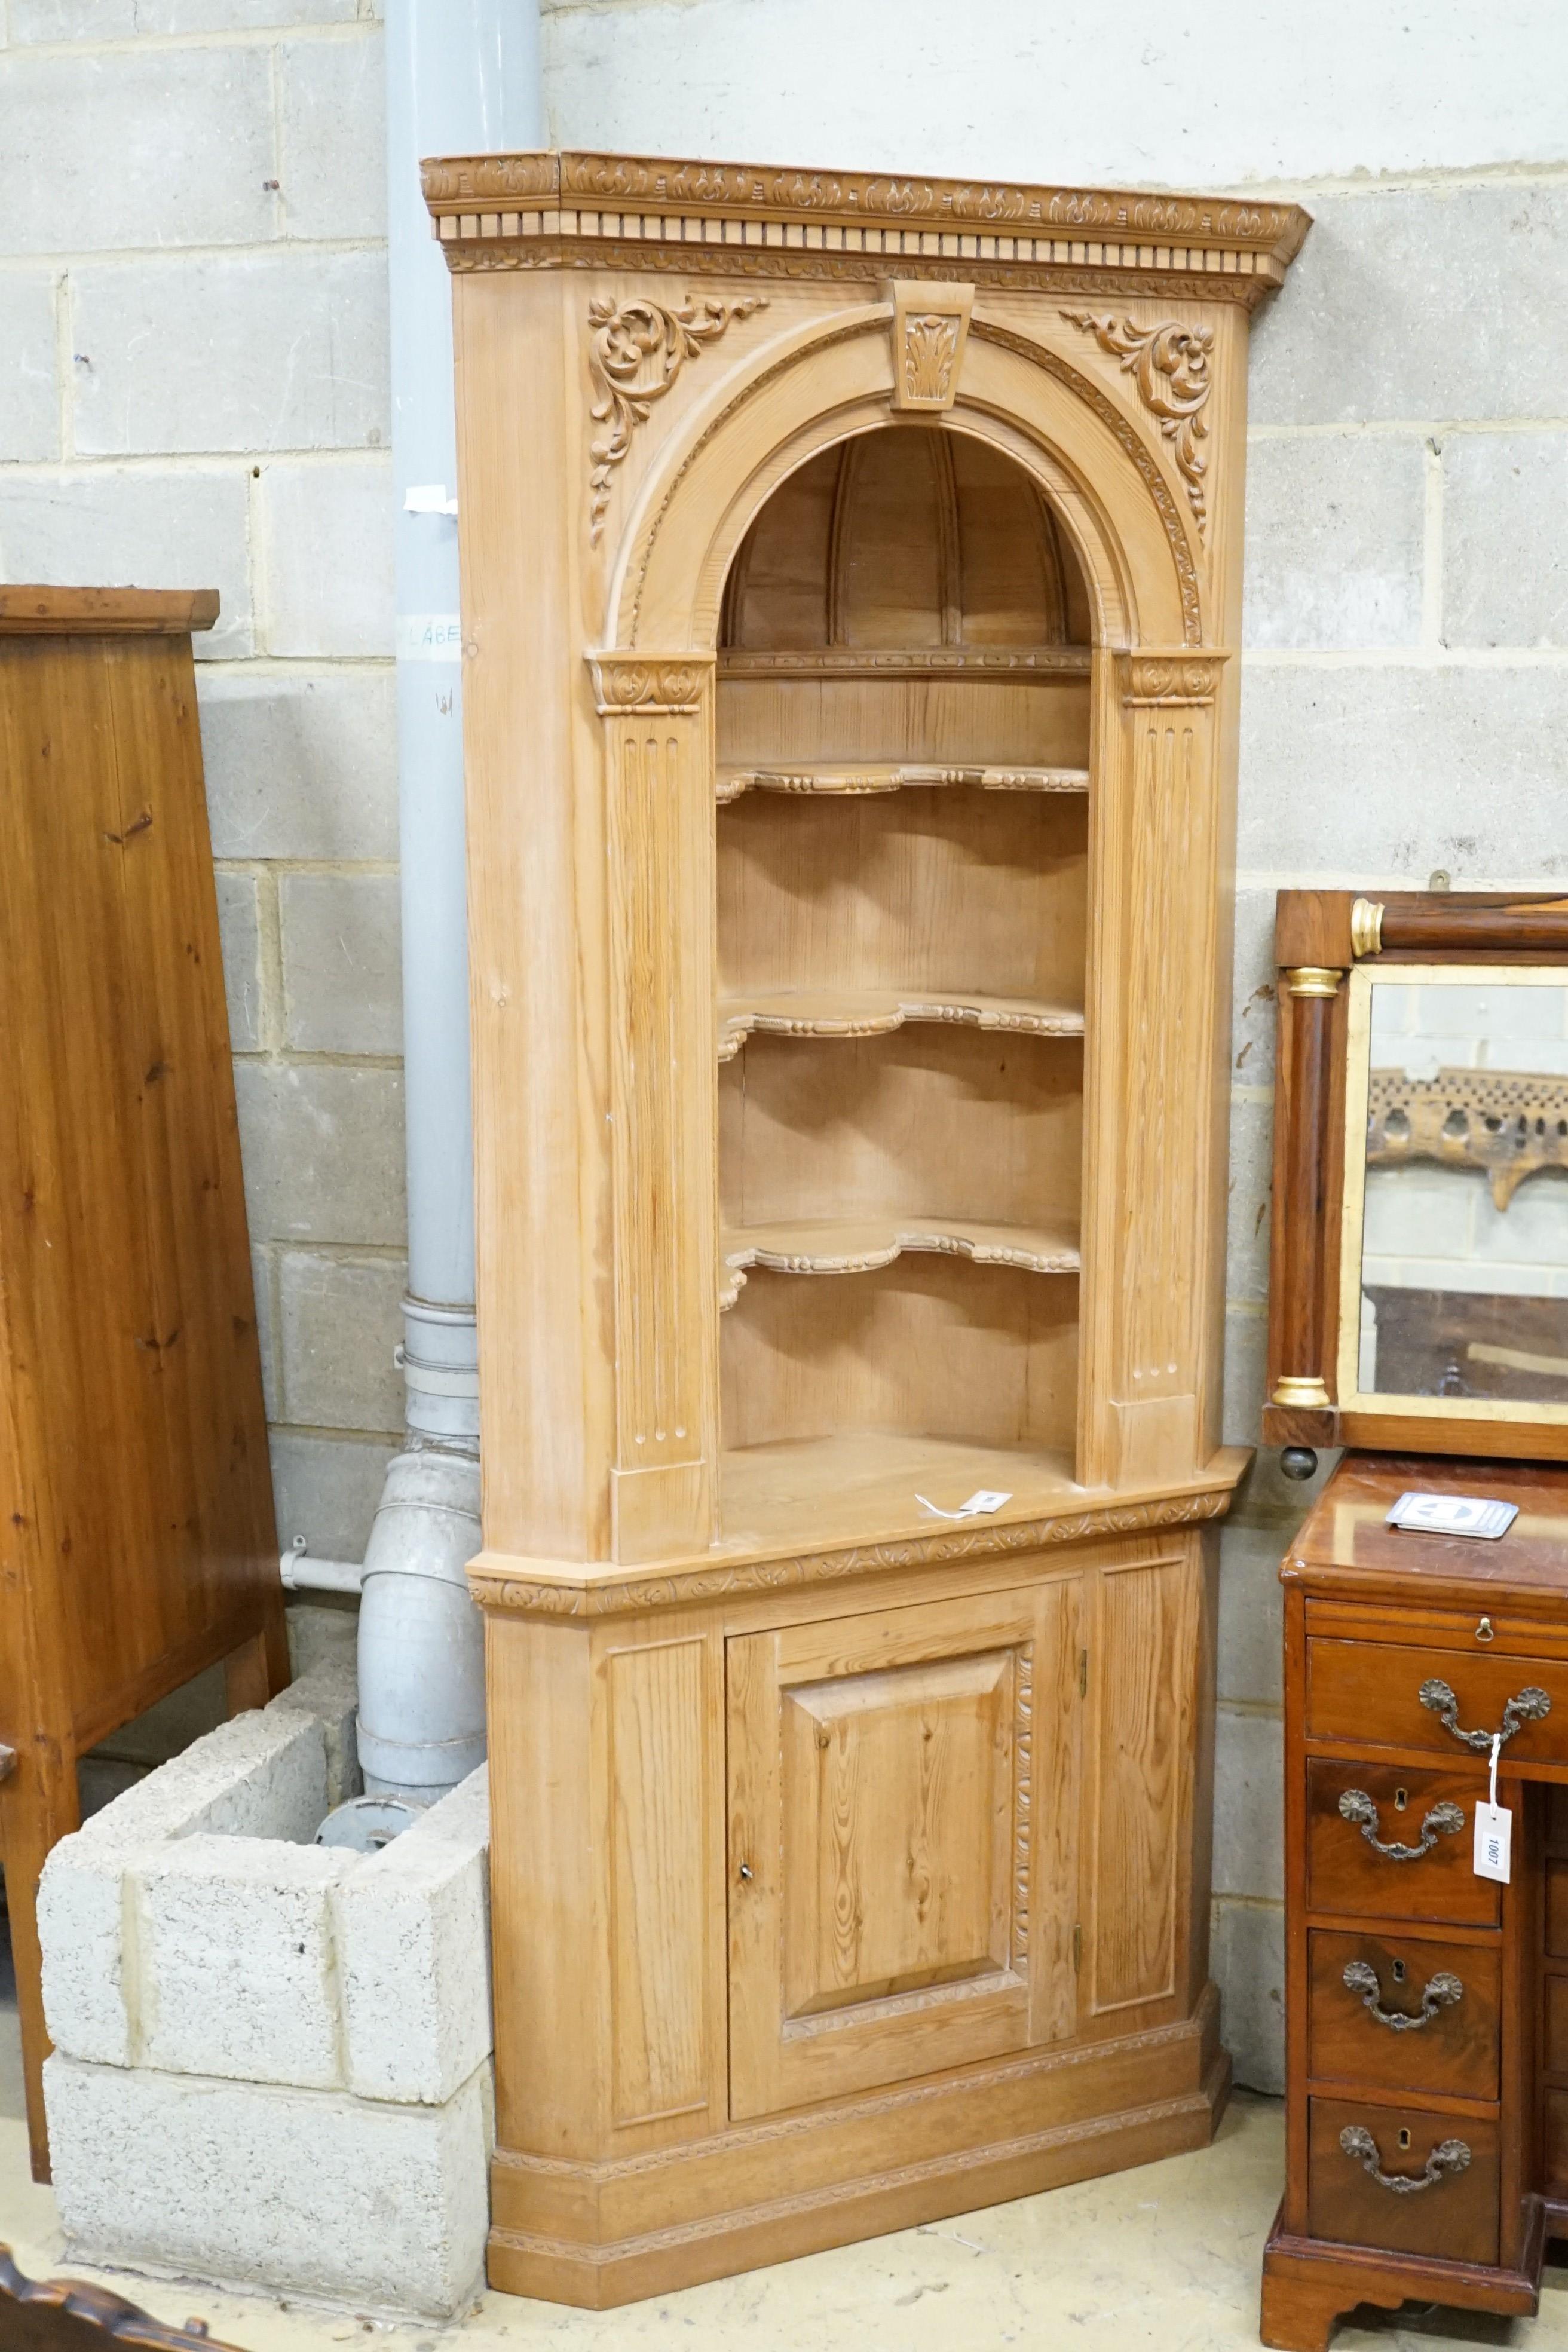 An 18th century style carved pine standing corner cupboard with arched shelved recess, width 94cm, height 204cm